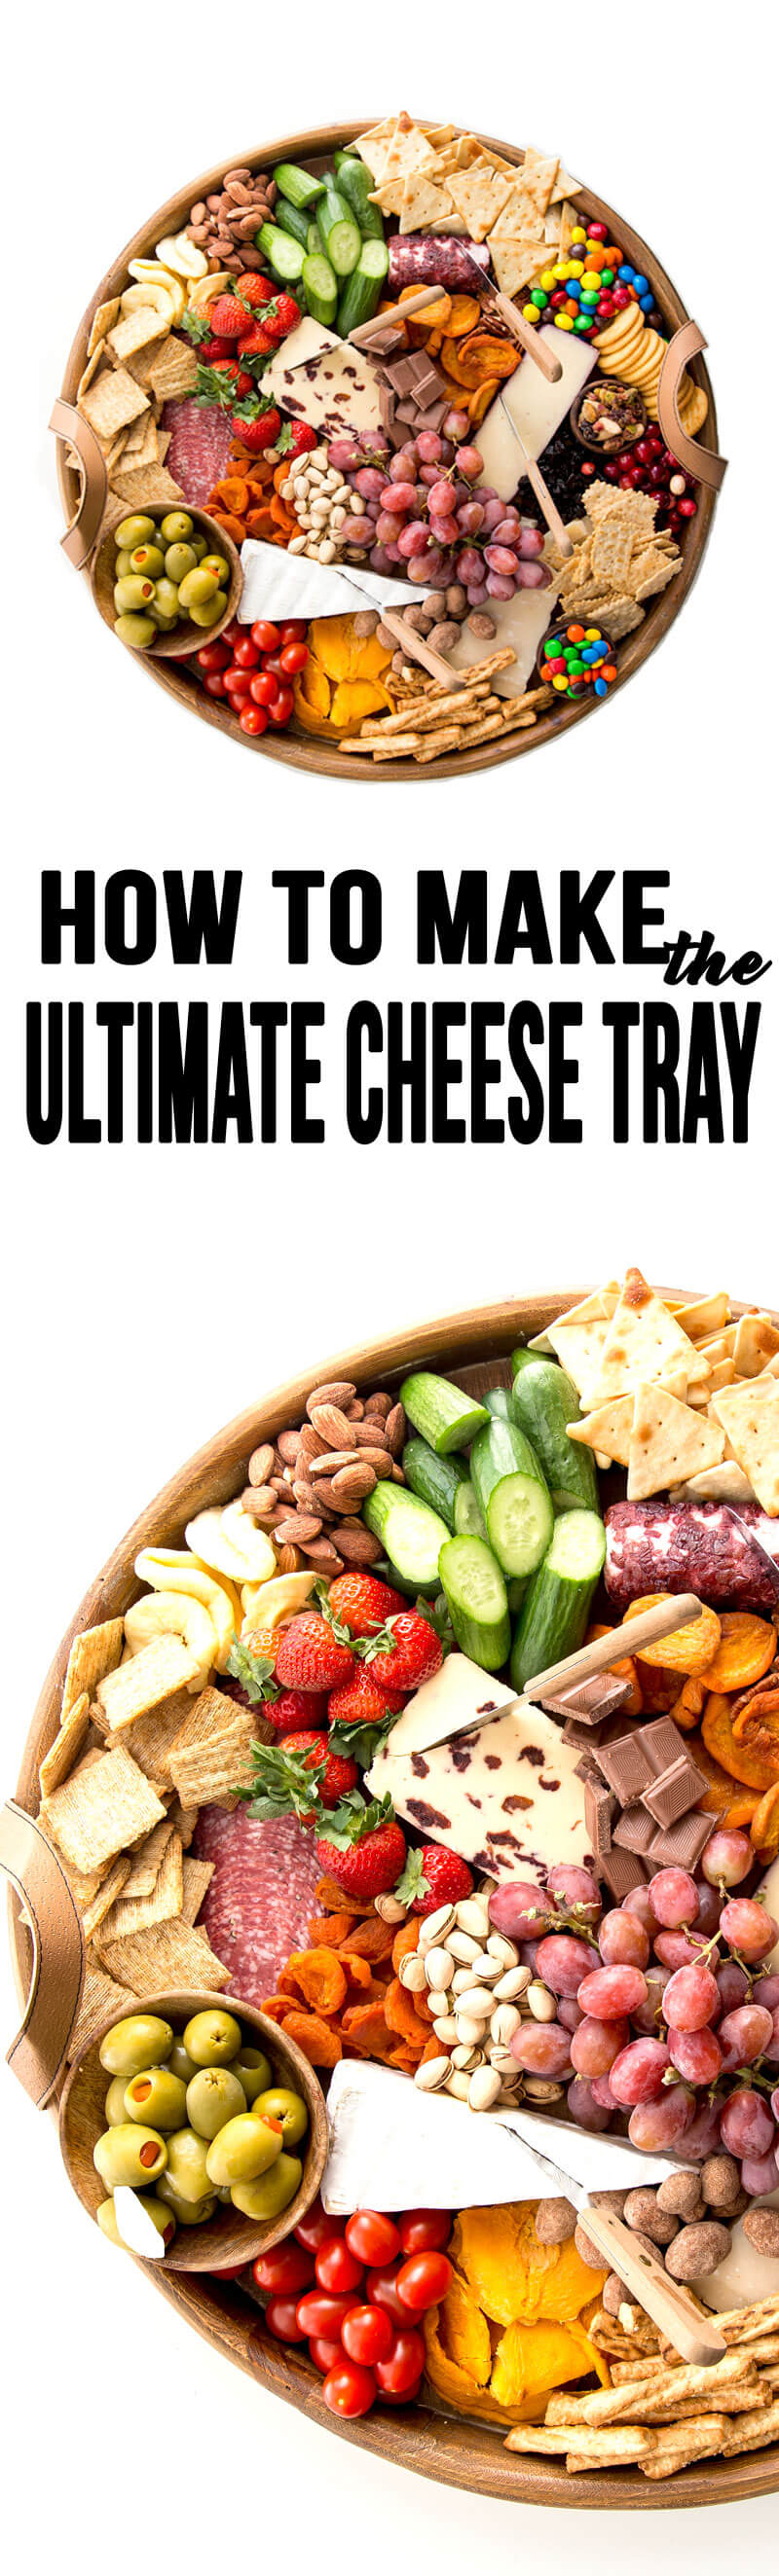 How to make the ultimate cheese tray for a party appetizer!